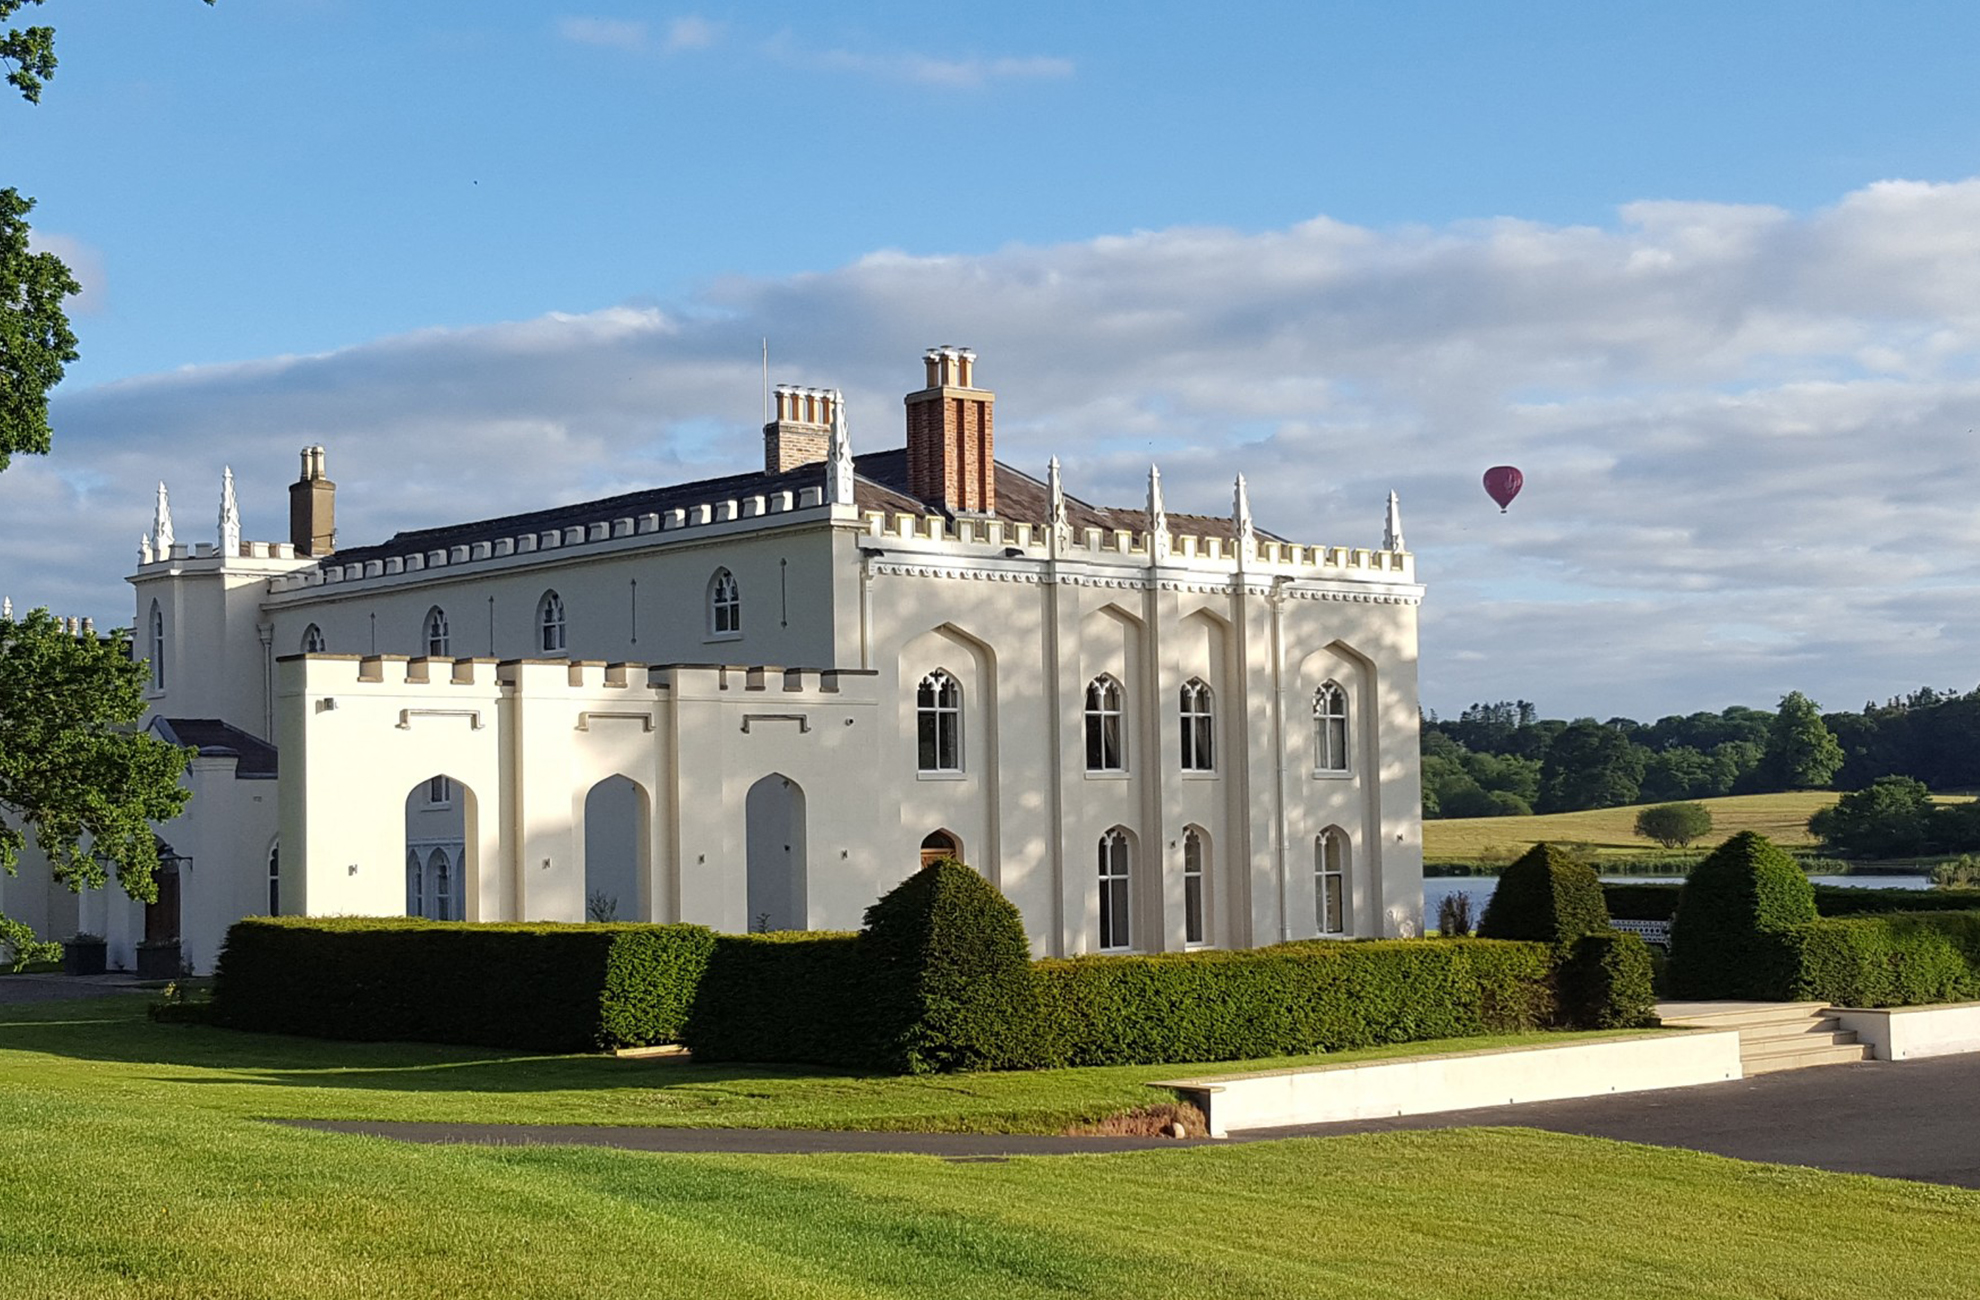 A hot air balloon elegantly flies over the abbey